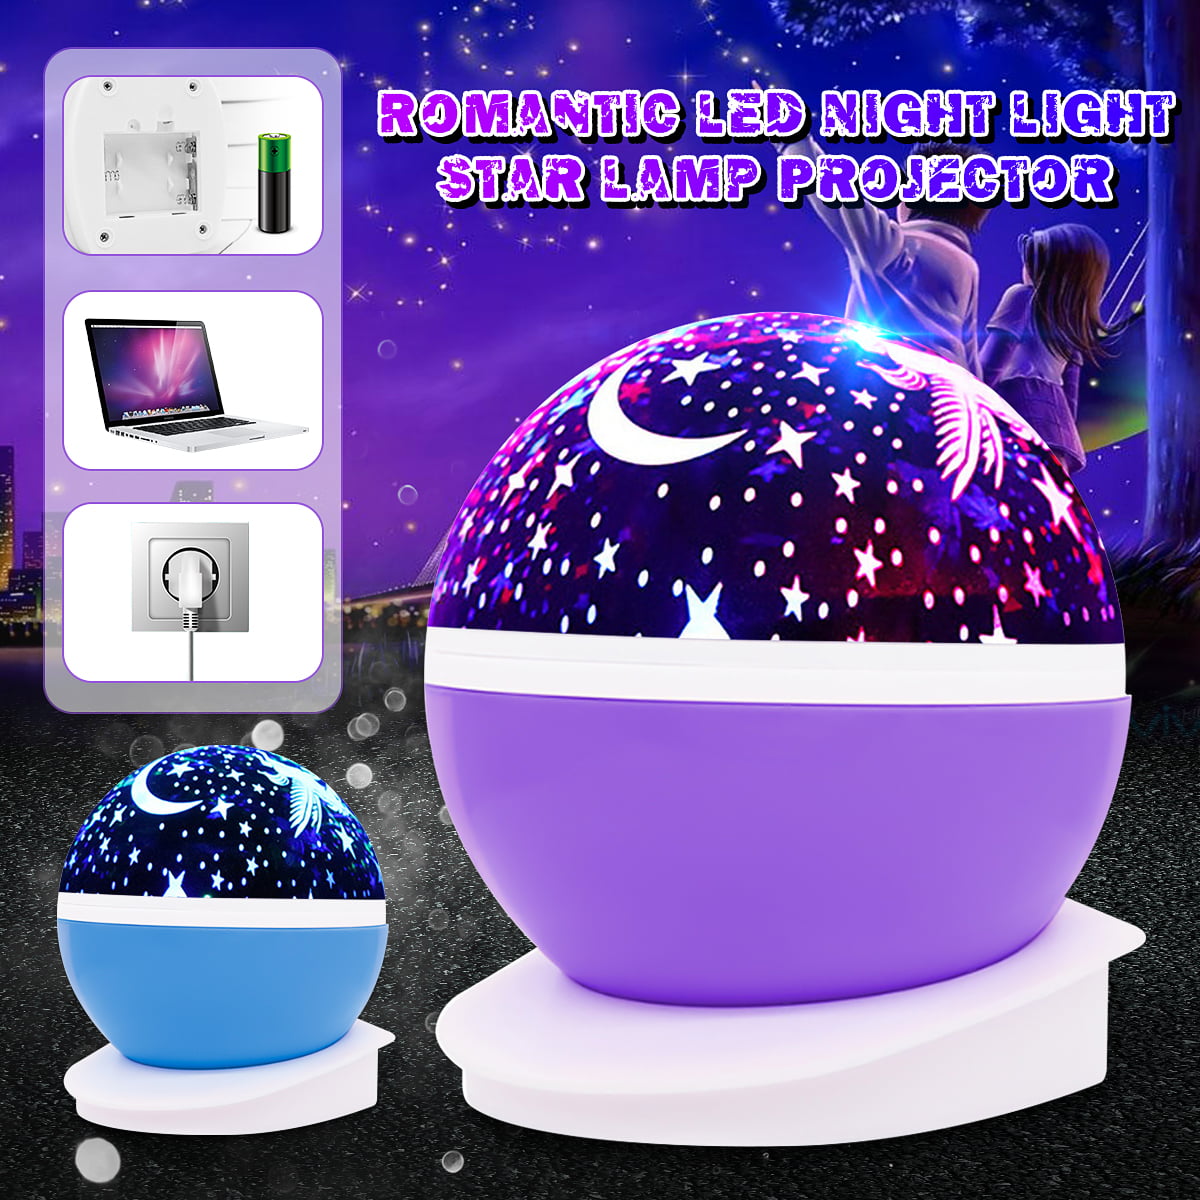 White Projector Lamp,EMIUP Night Light Projector Star Projector 360 Degree Rotation Sky Projector Ocean Projector Use for Kids Night Light,Decorative Light,Mood Light,Christmas Gifts,Birthday Present